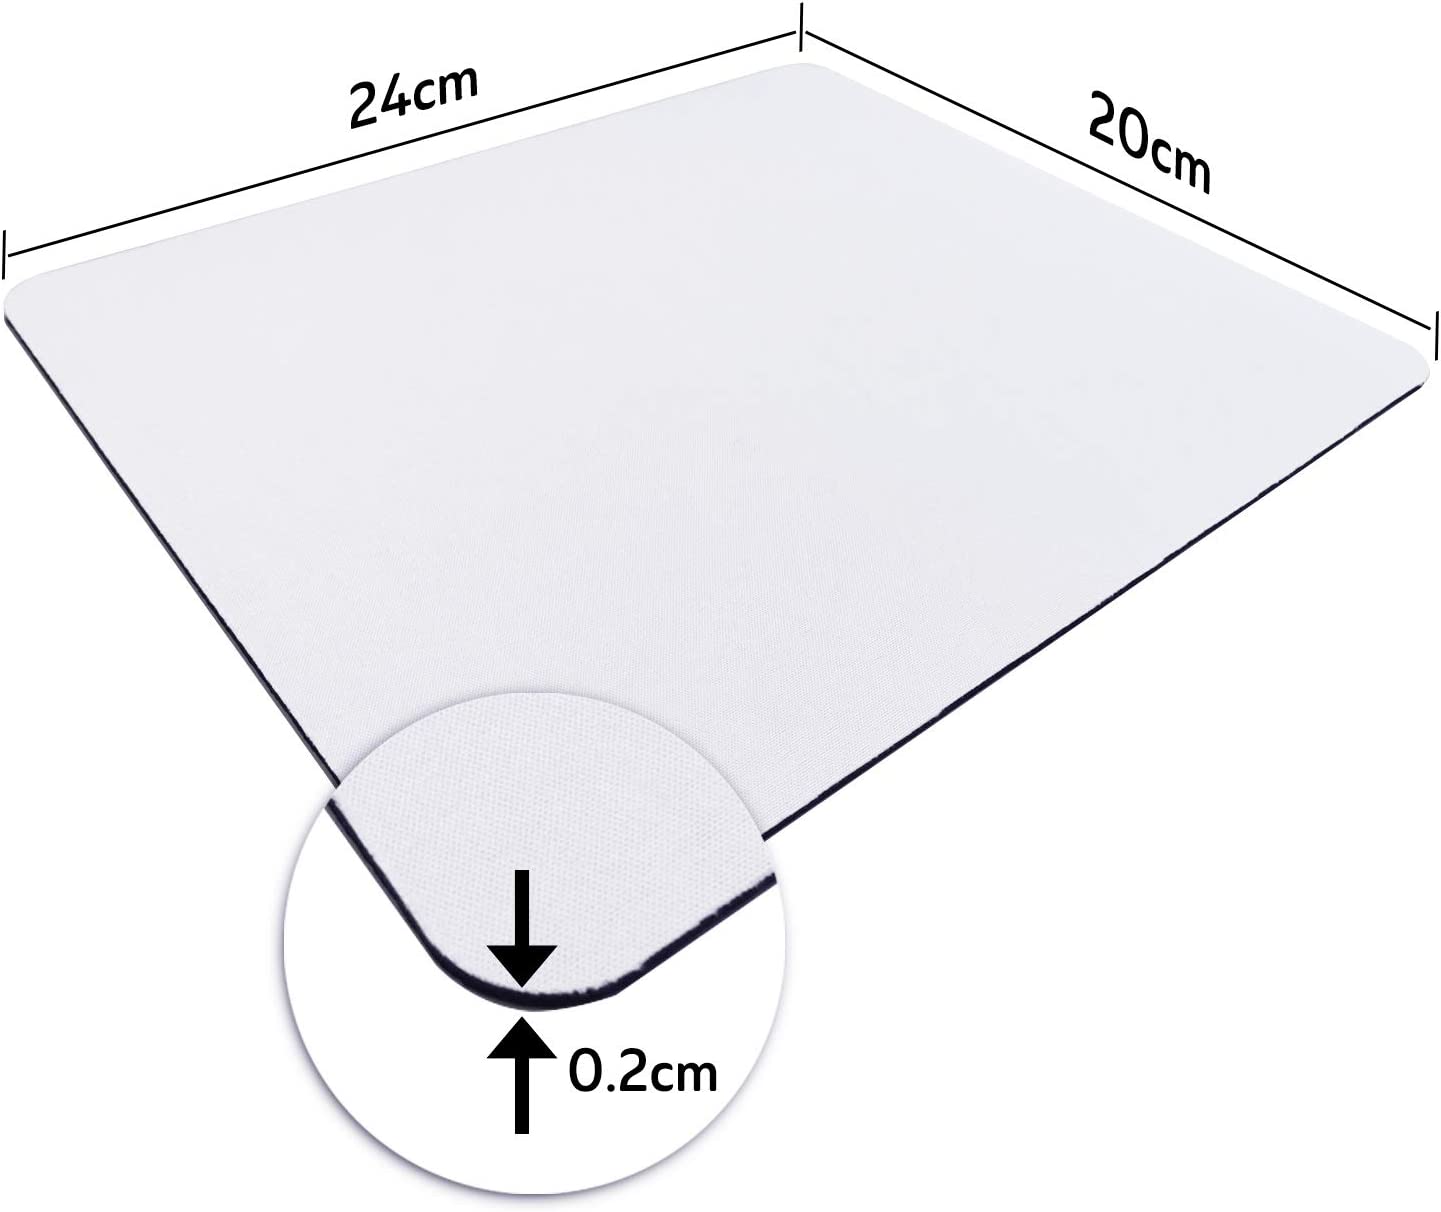 A-SUB Sublimation Mouse Pad Blank for Heat Press Printing Crafts 24x20x0.2cm 12 pcs